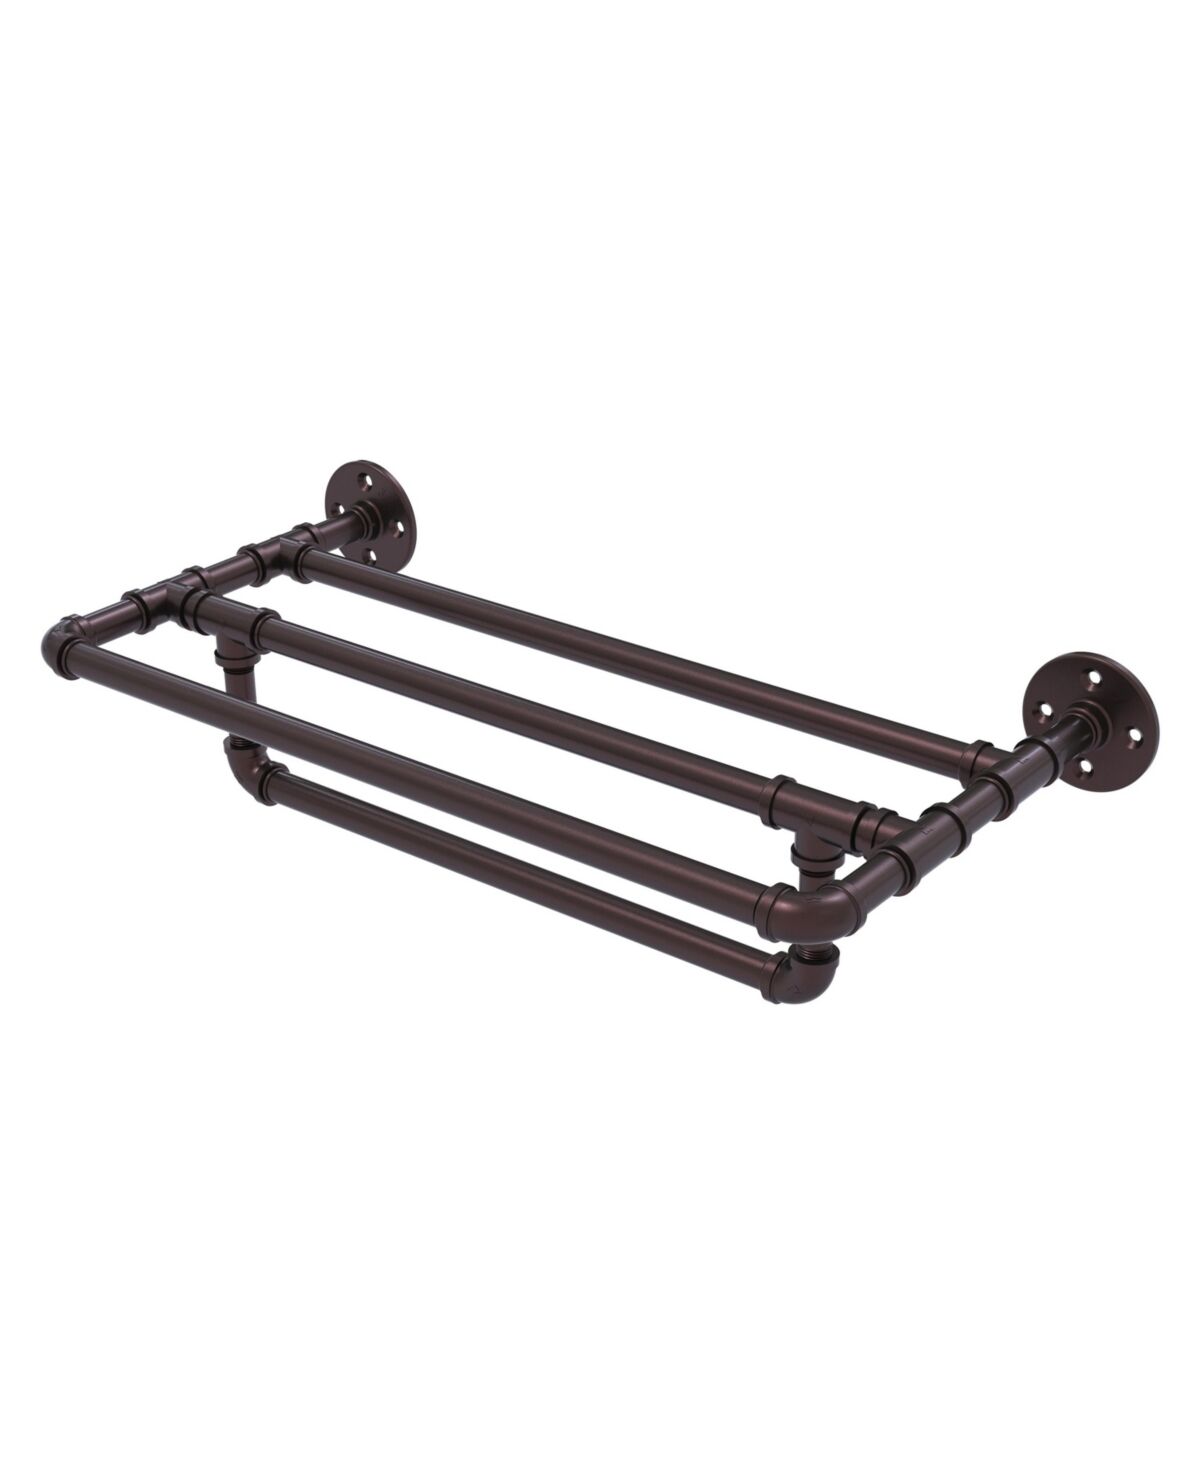 Allied Pipeline Collection 36 Inch Wall Mounted Towel Shelf with Towel Bar - Antique bronze